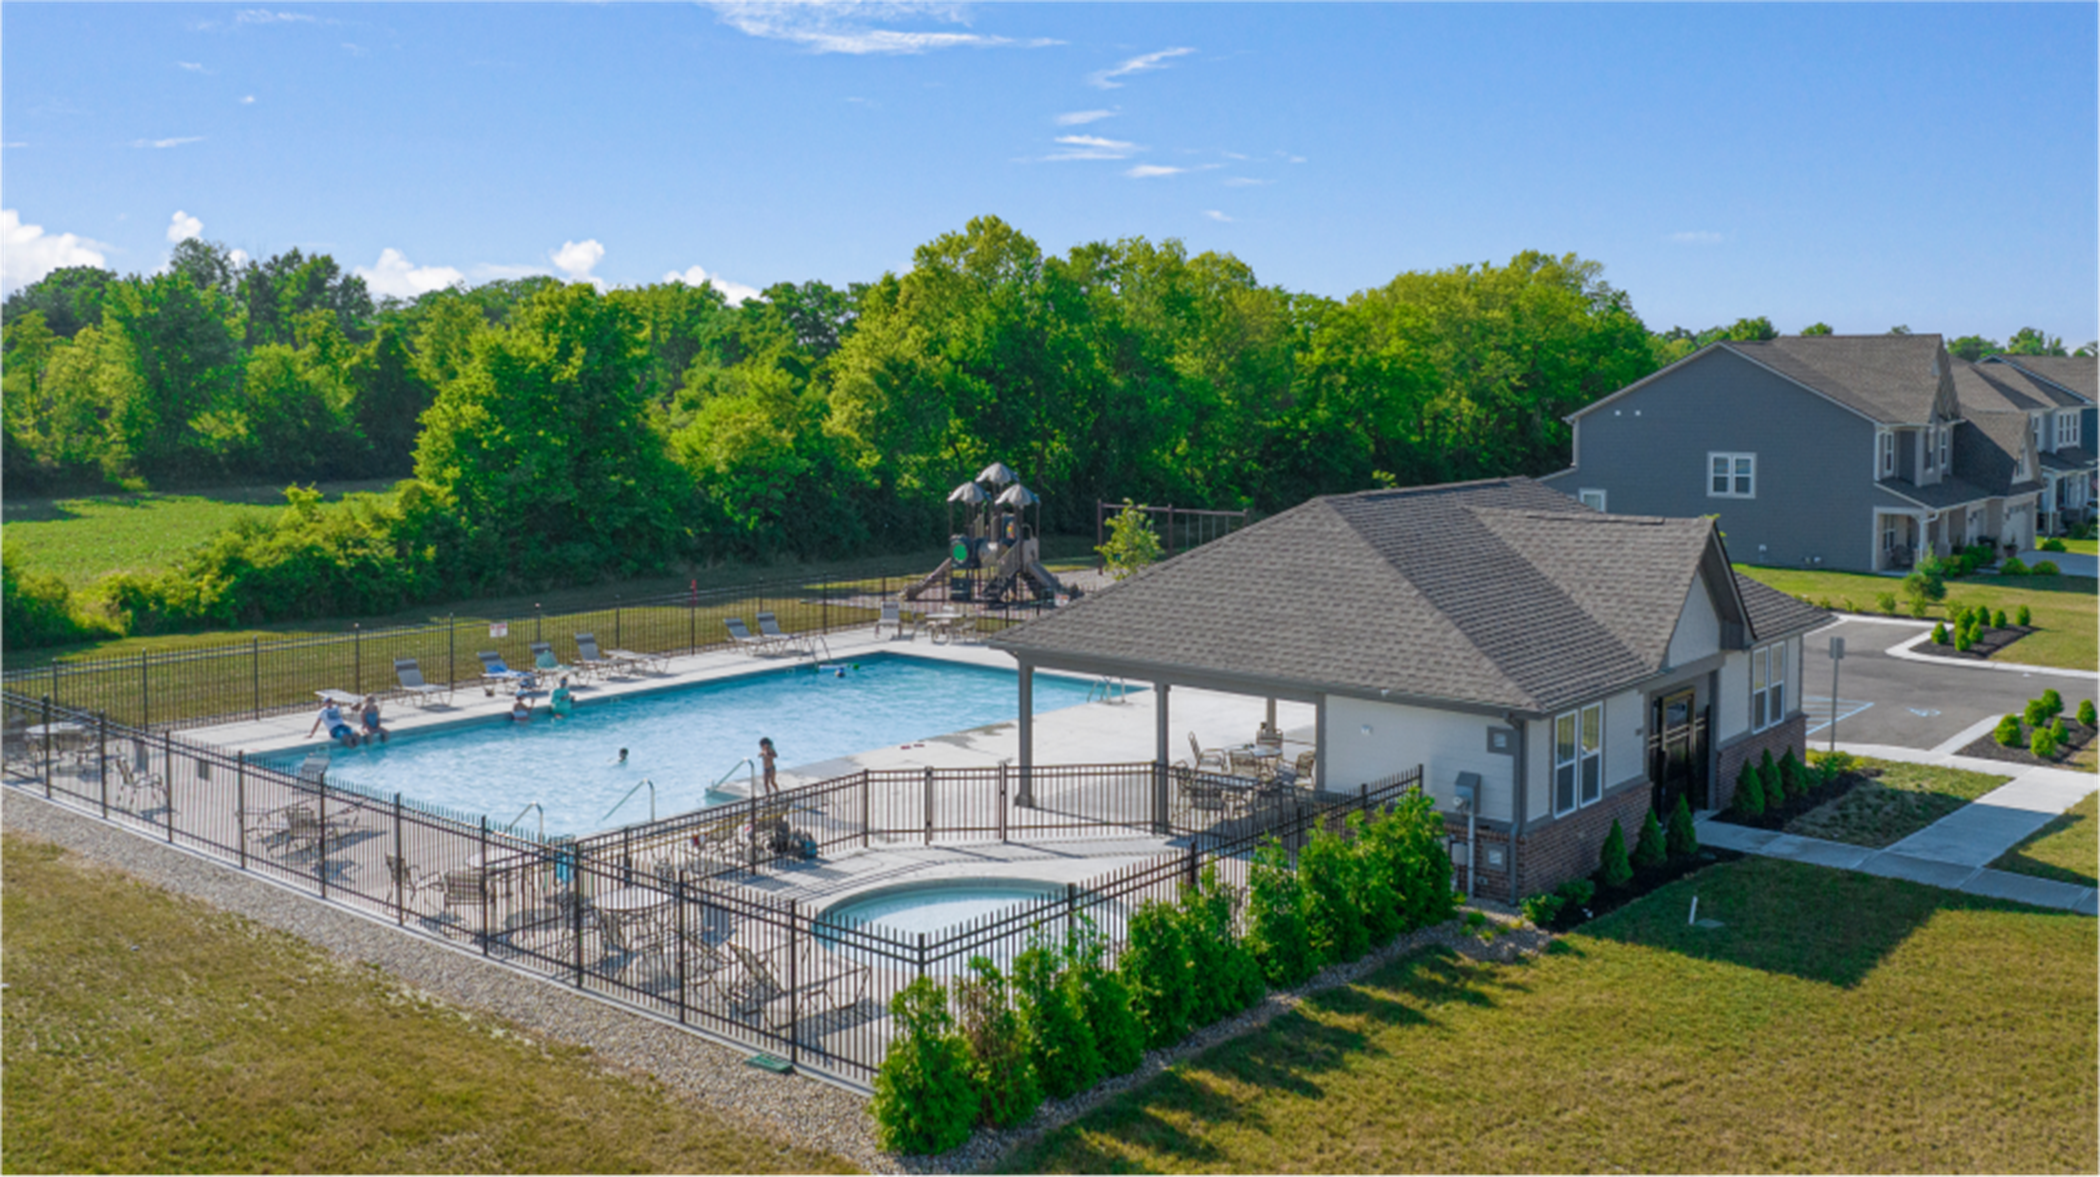 Community pool and poolhouse